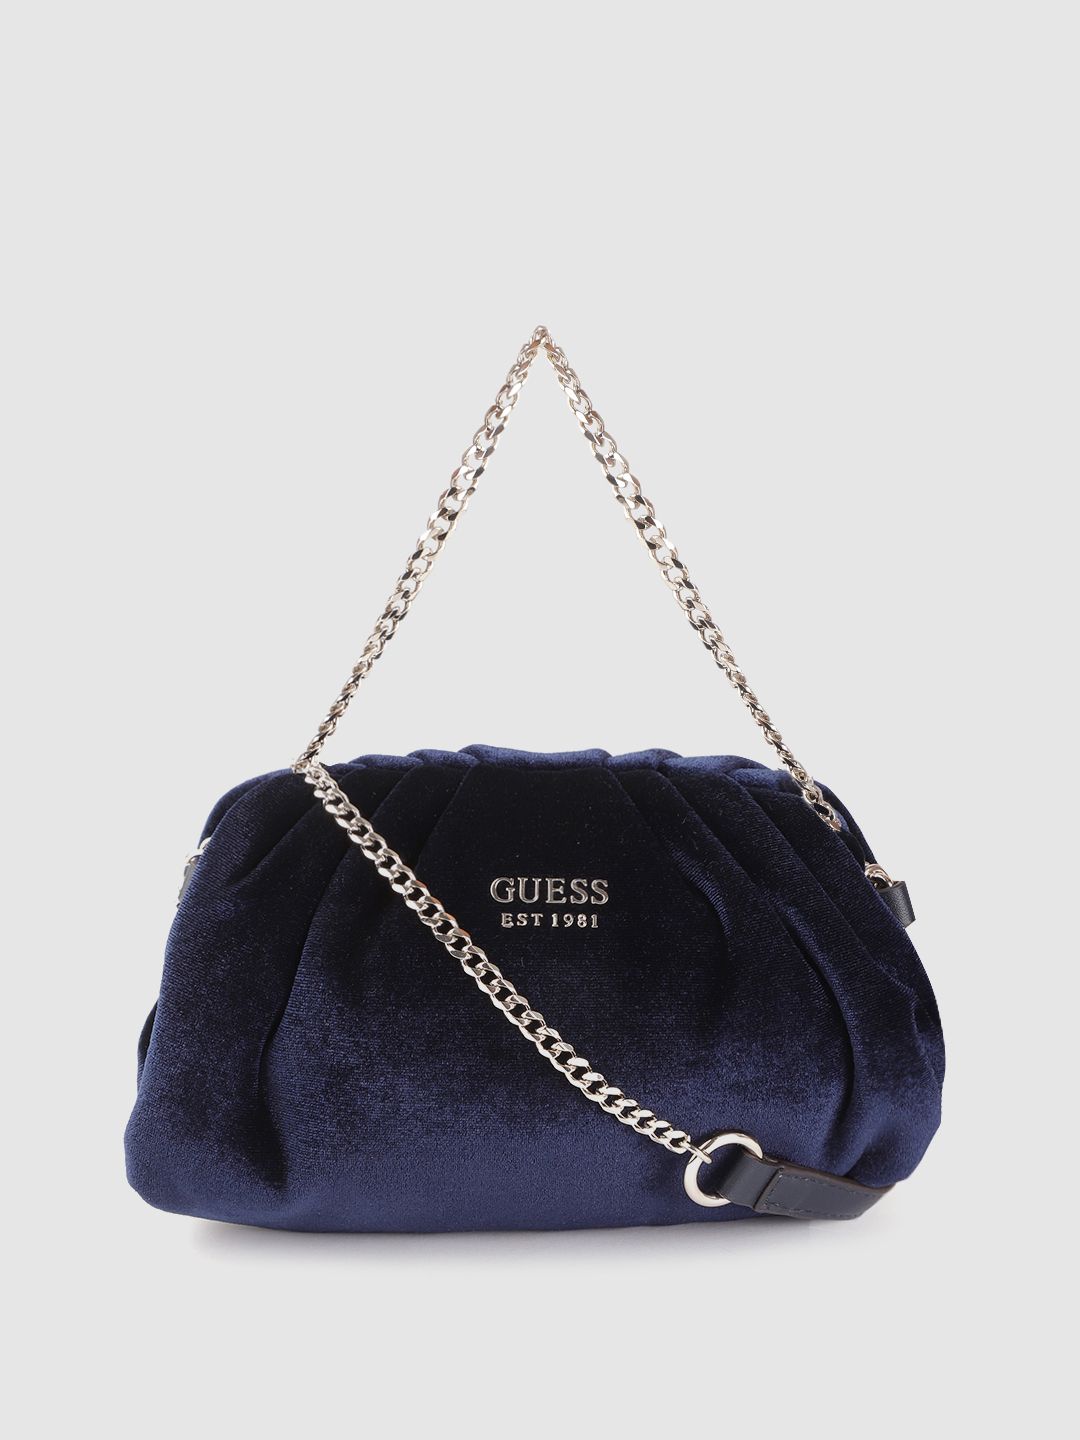 GUESS Women Navy Blue Solid Structured Handheld Bag Price in India